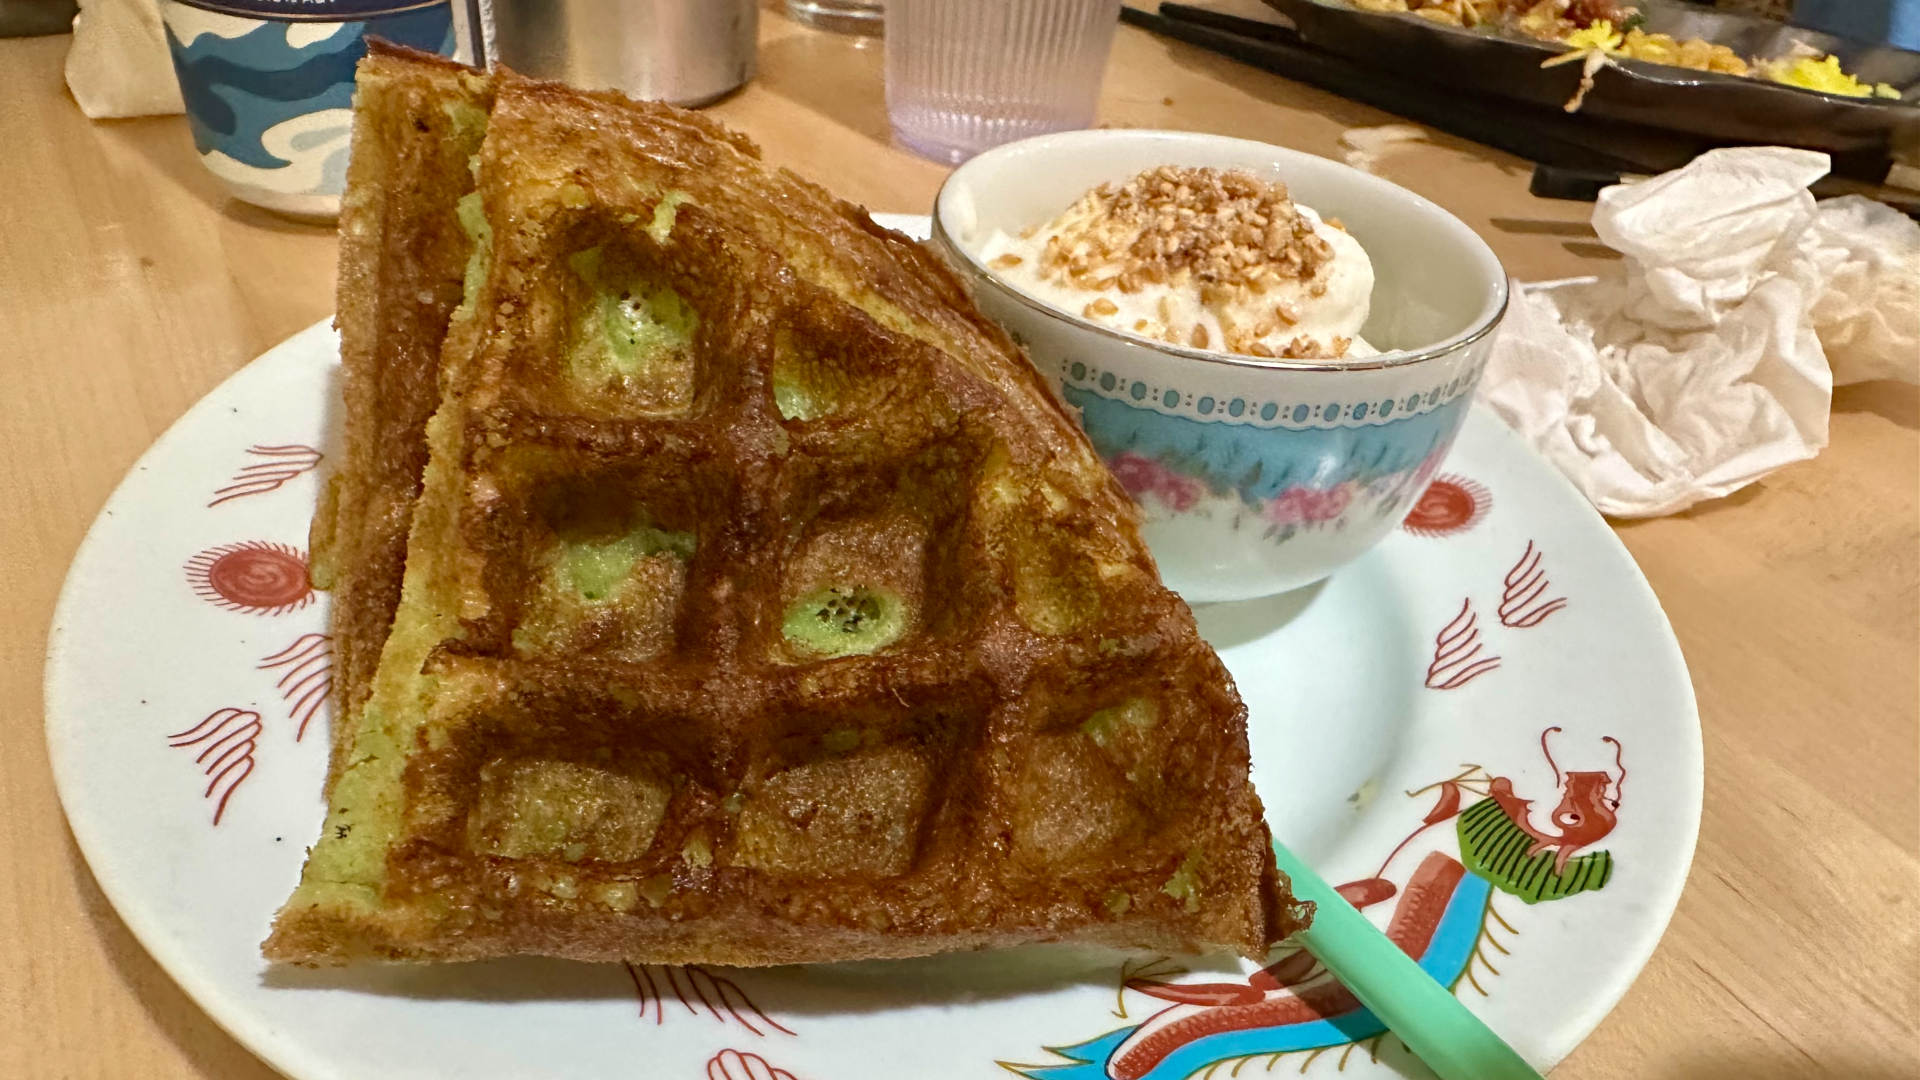 A green-tinged Pandan waffle with bowl of coconut whip and accompanying strawlike spoon on a plate.